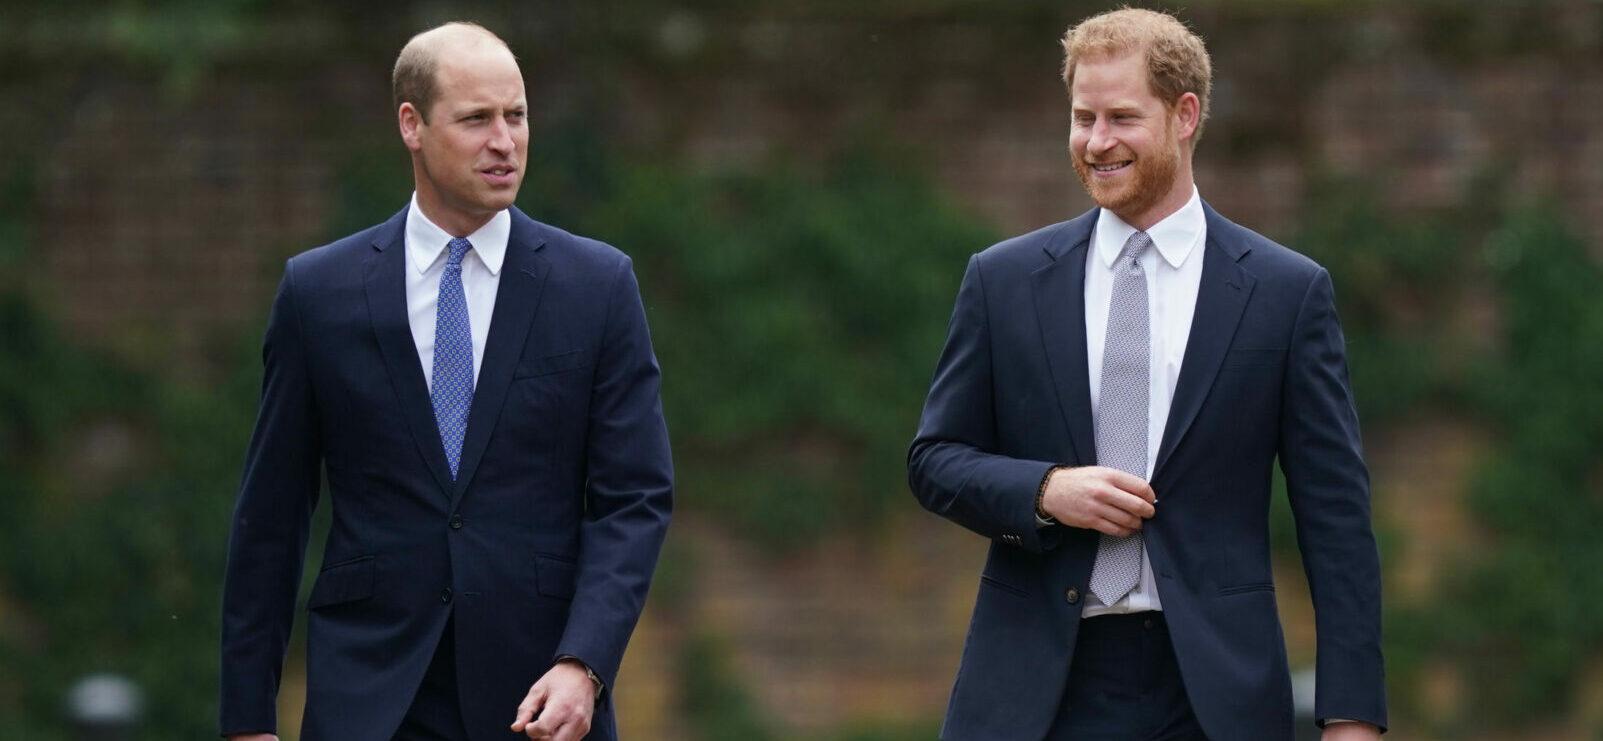 Prince Harry Was Allegedly Left ‘In Tears’ After Military Role Was Given To Prince William